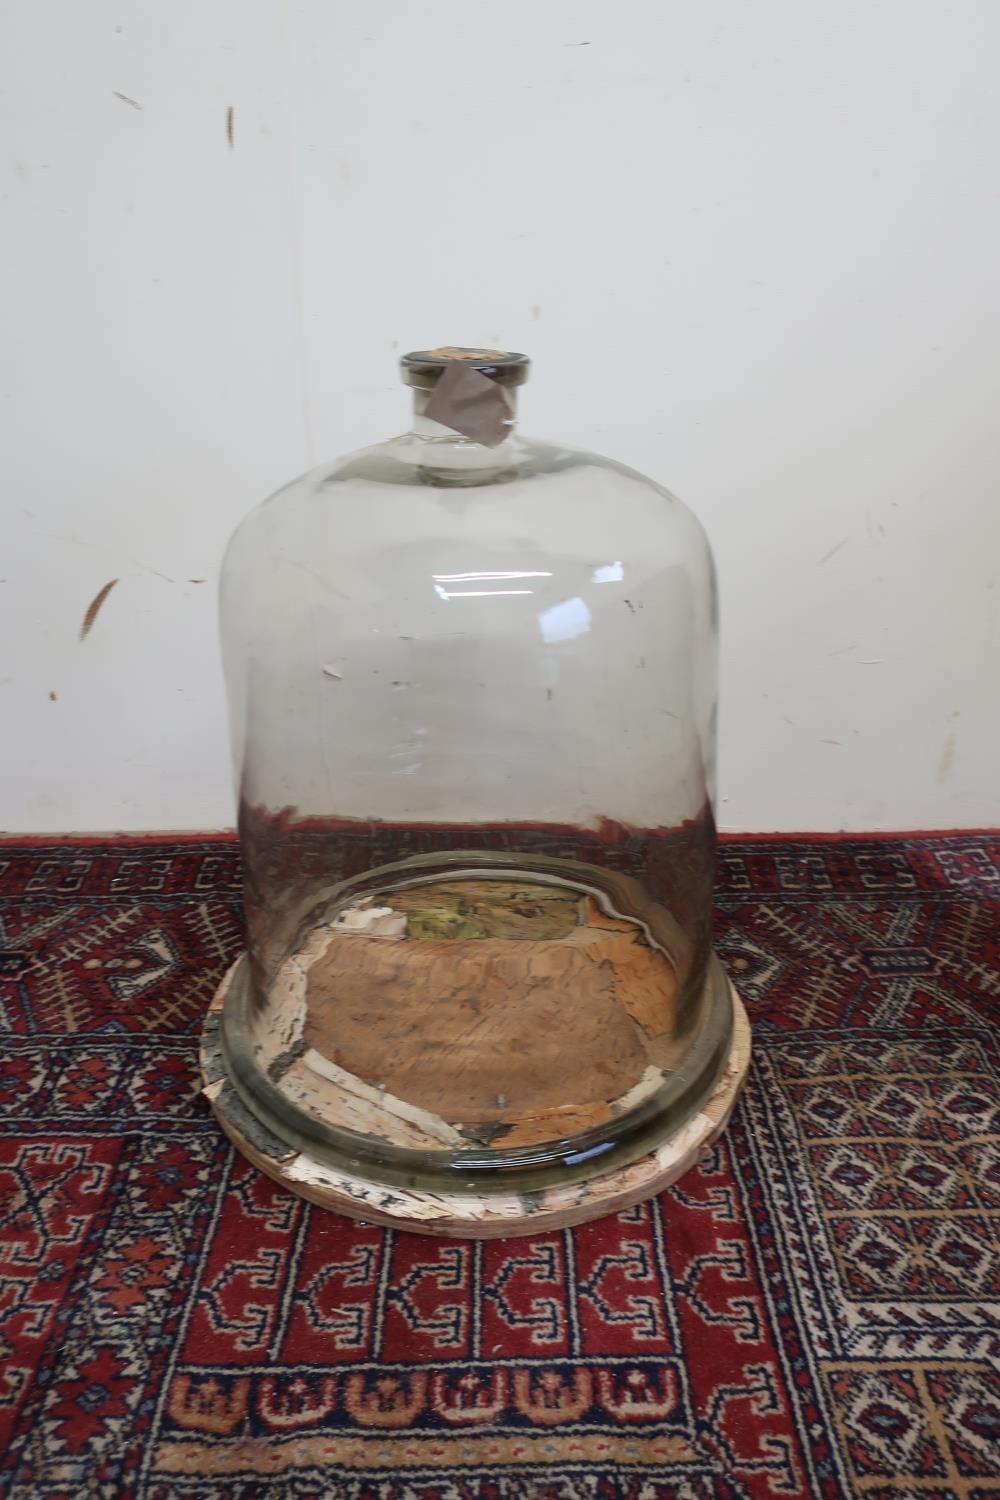 Large clear glass cloche/scientific bell jar with cork stopper, approx H48cm at base D38.5cm